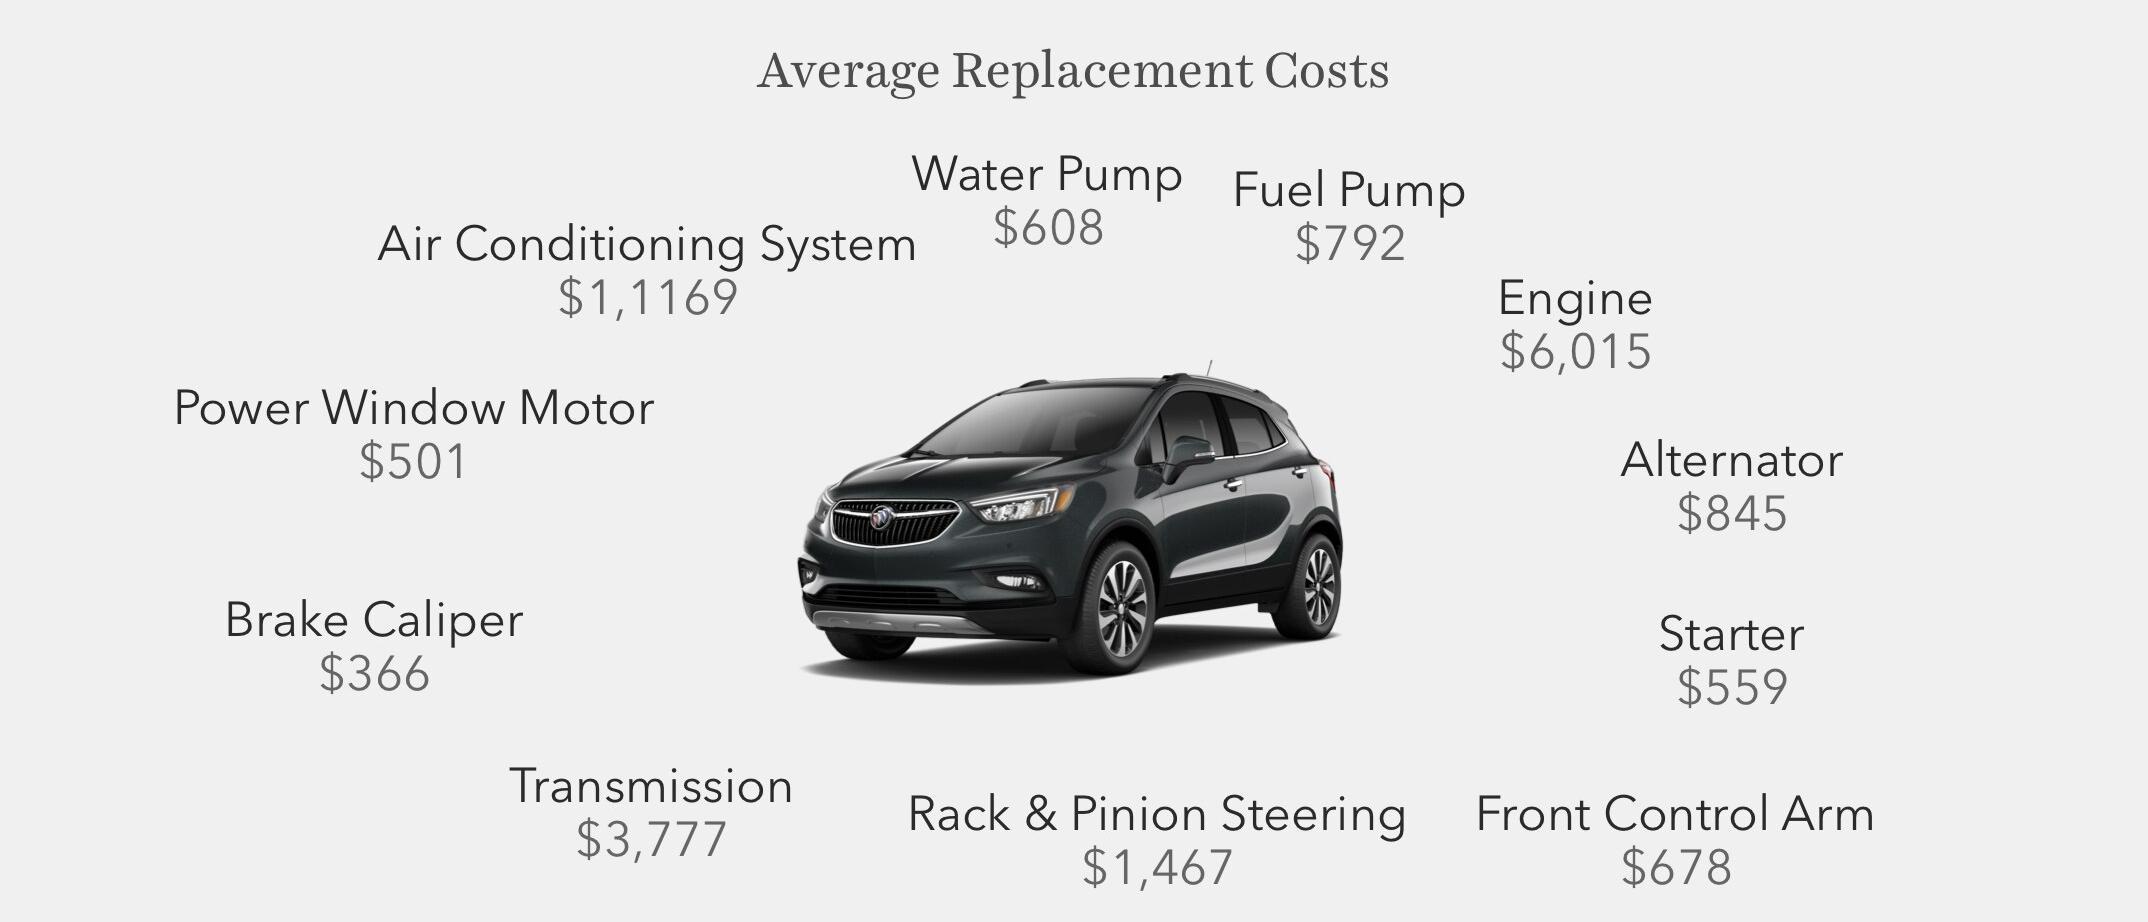 Buick Average Replacement Costs